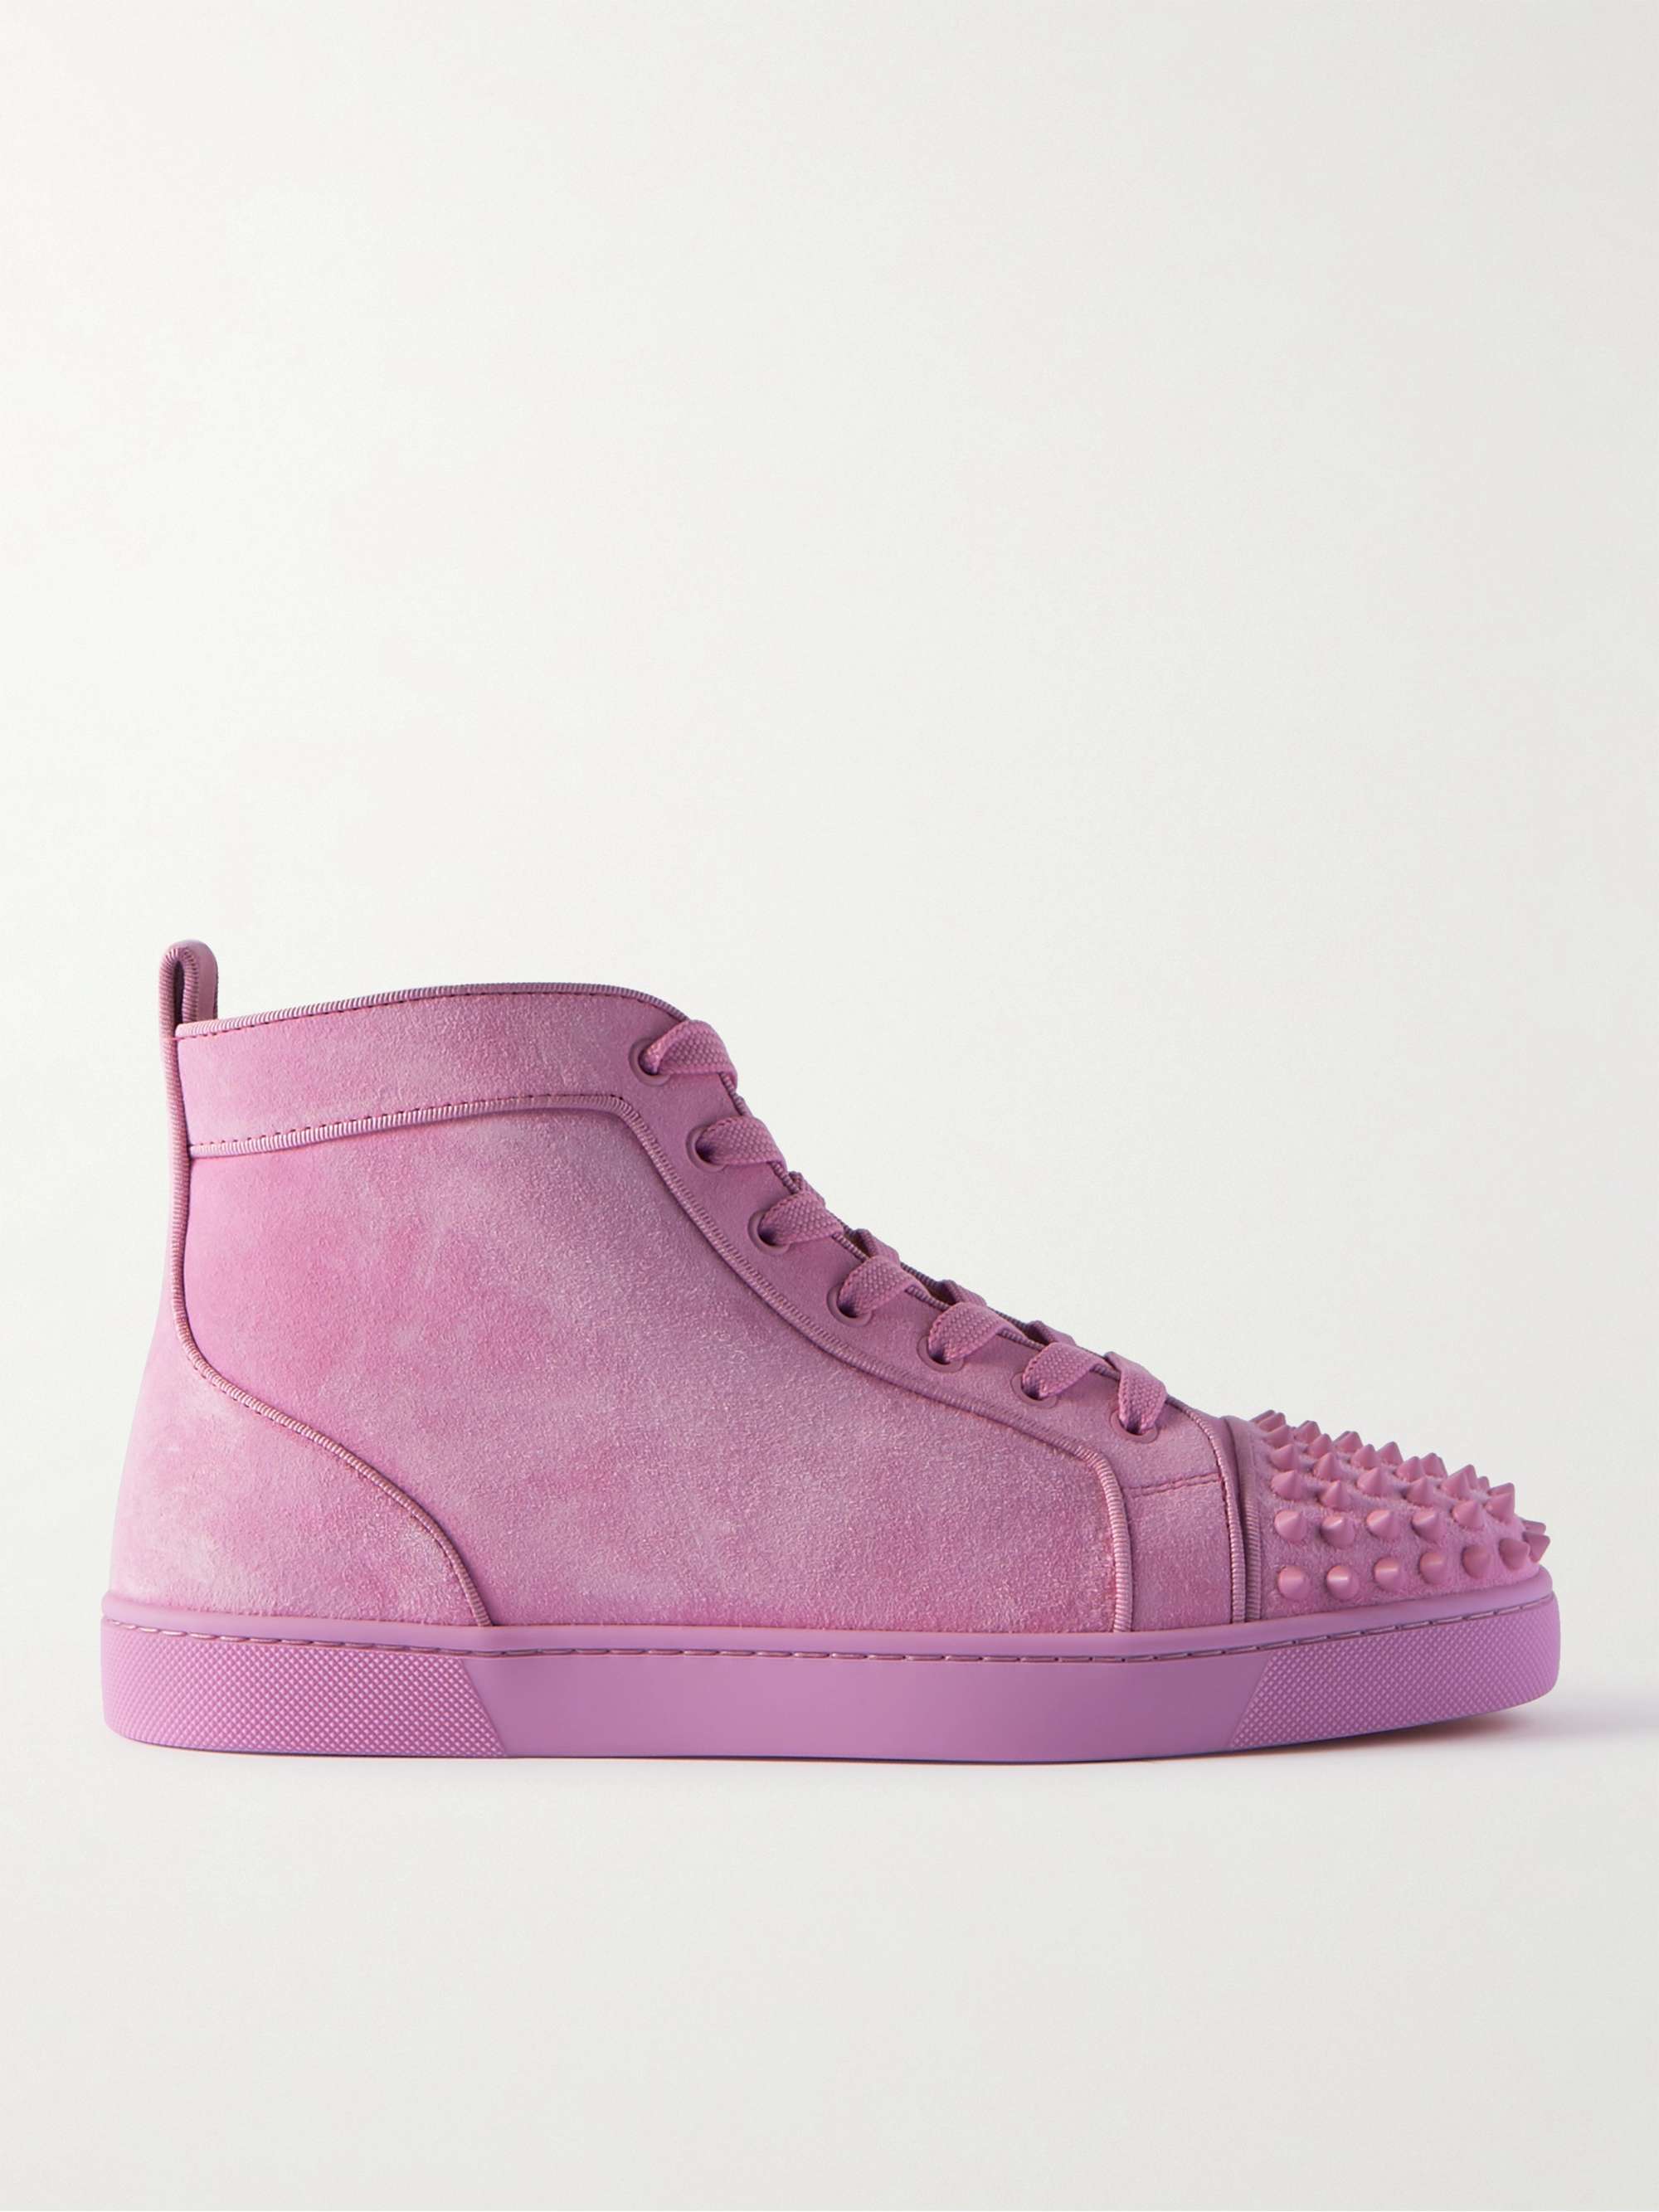 CHRISTIAN LOUBOUTIN Louis Orlato Grosgrain-Trimmed Suede High-Top Sneakers  | MR PORTER